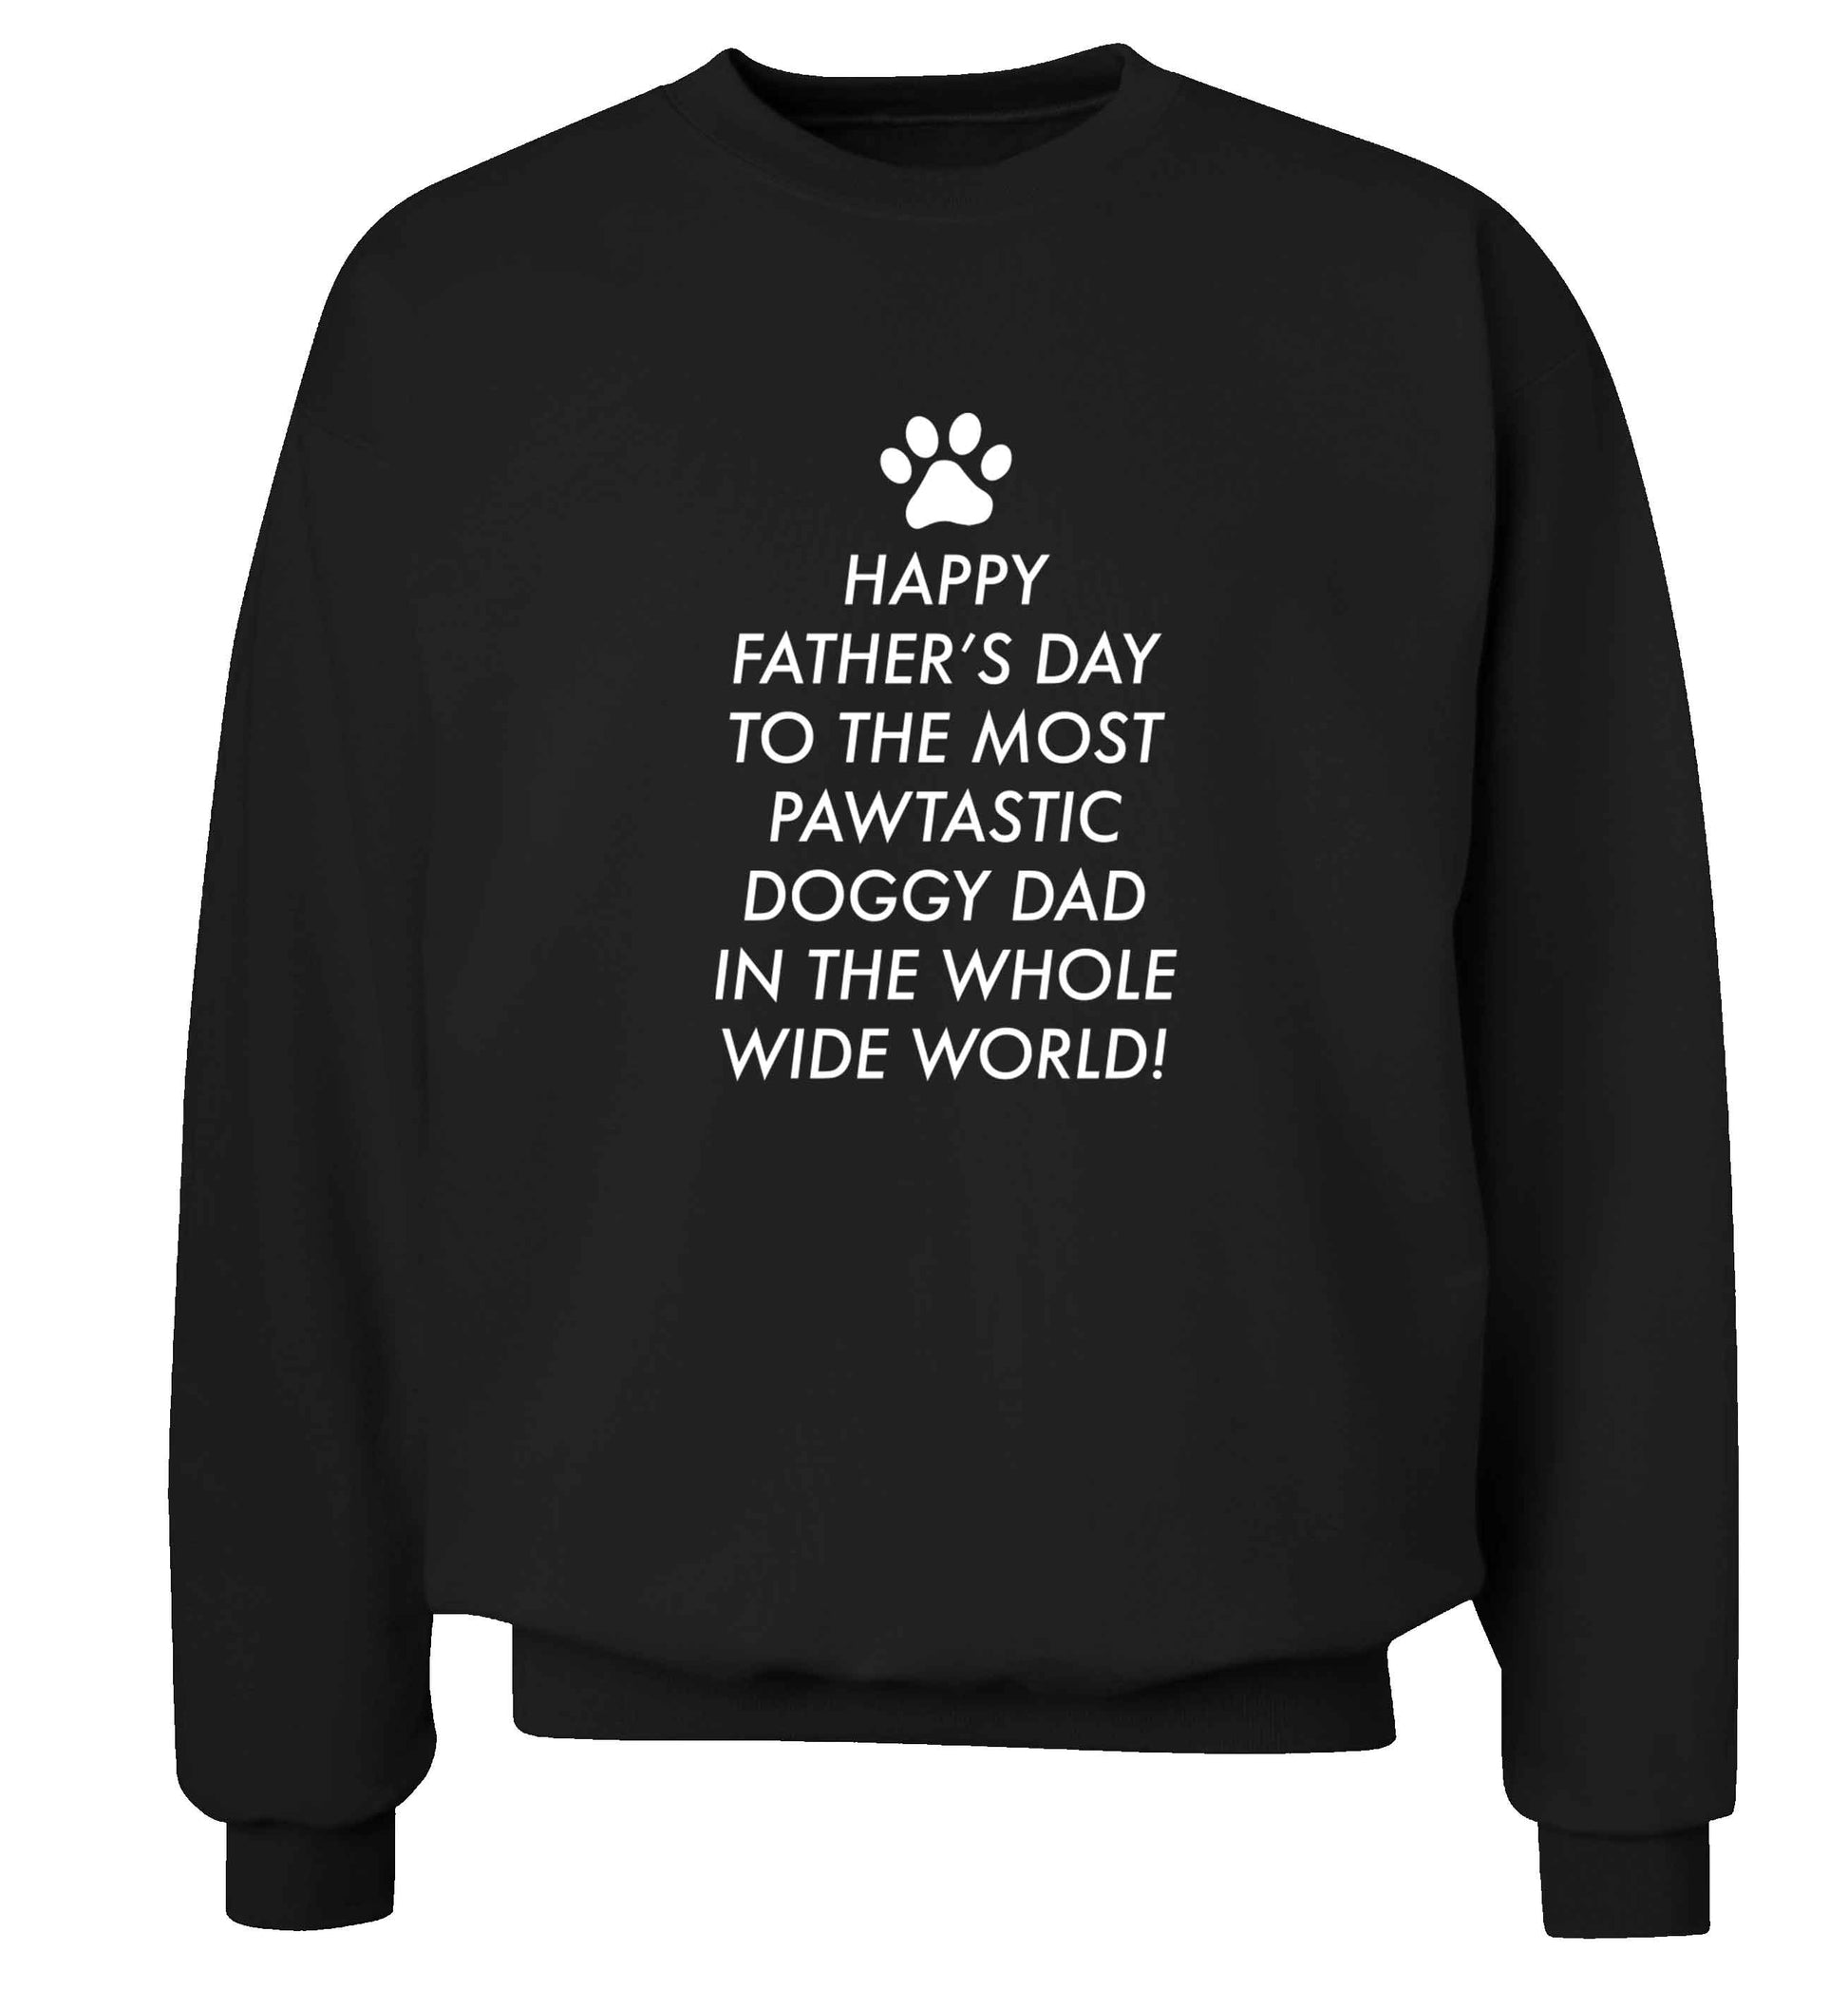 Happy Father's day to the most pawtastic doggy dad in the whole wide world!adult's unisex black sweater 2XL